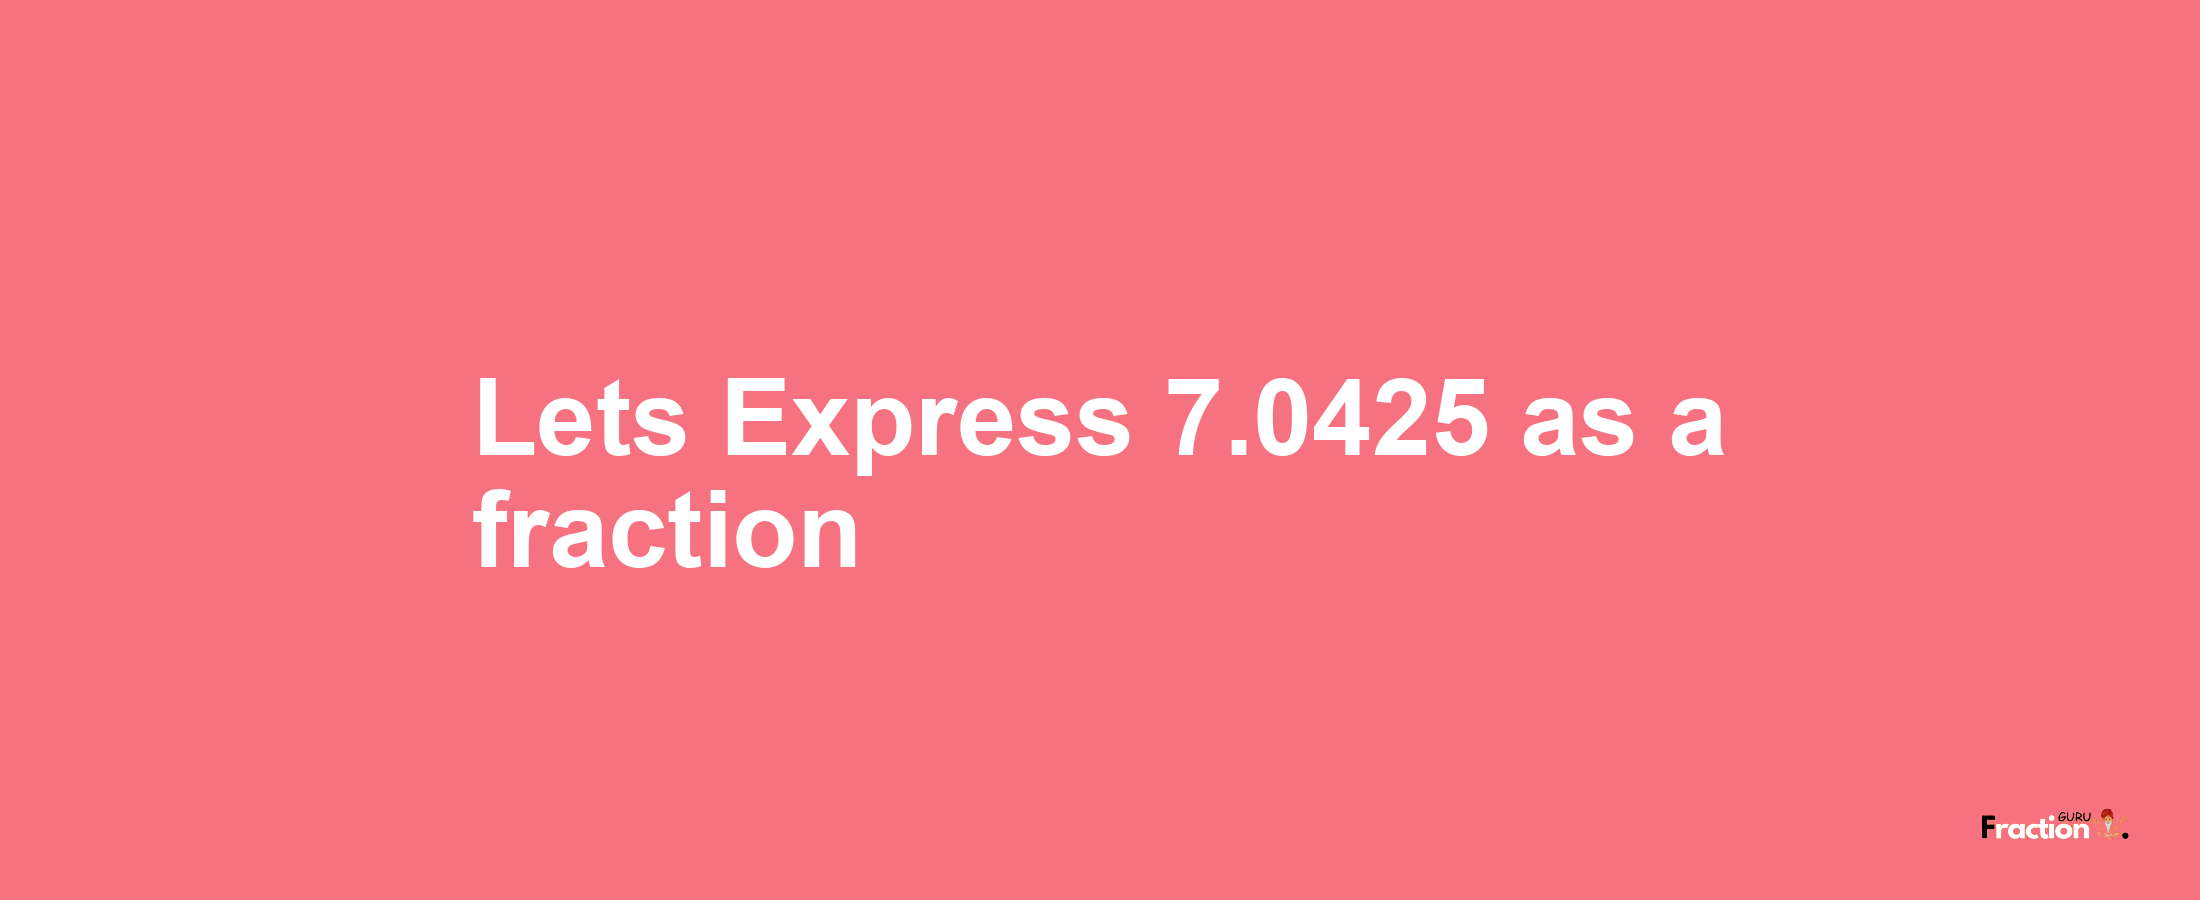 Lets Express 7.0425 as afraction